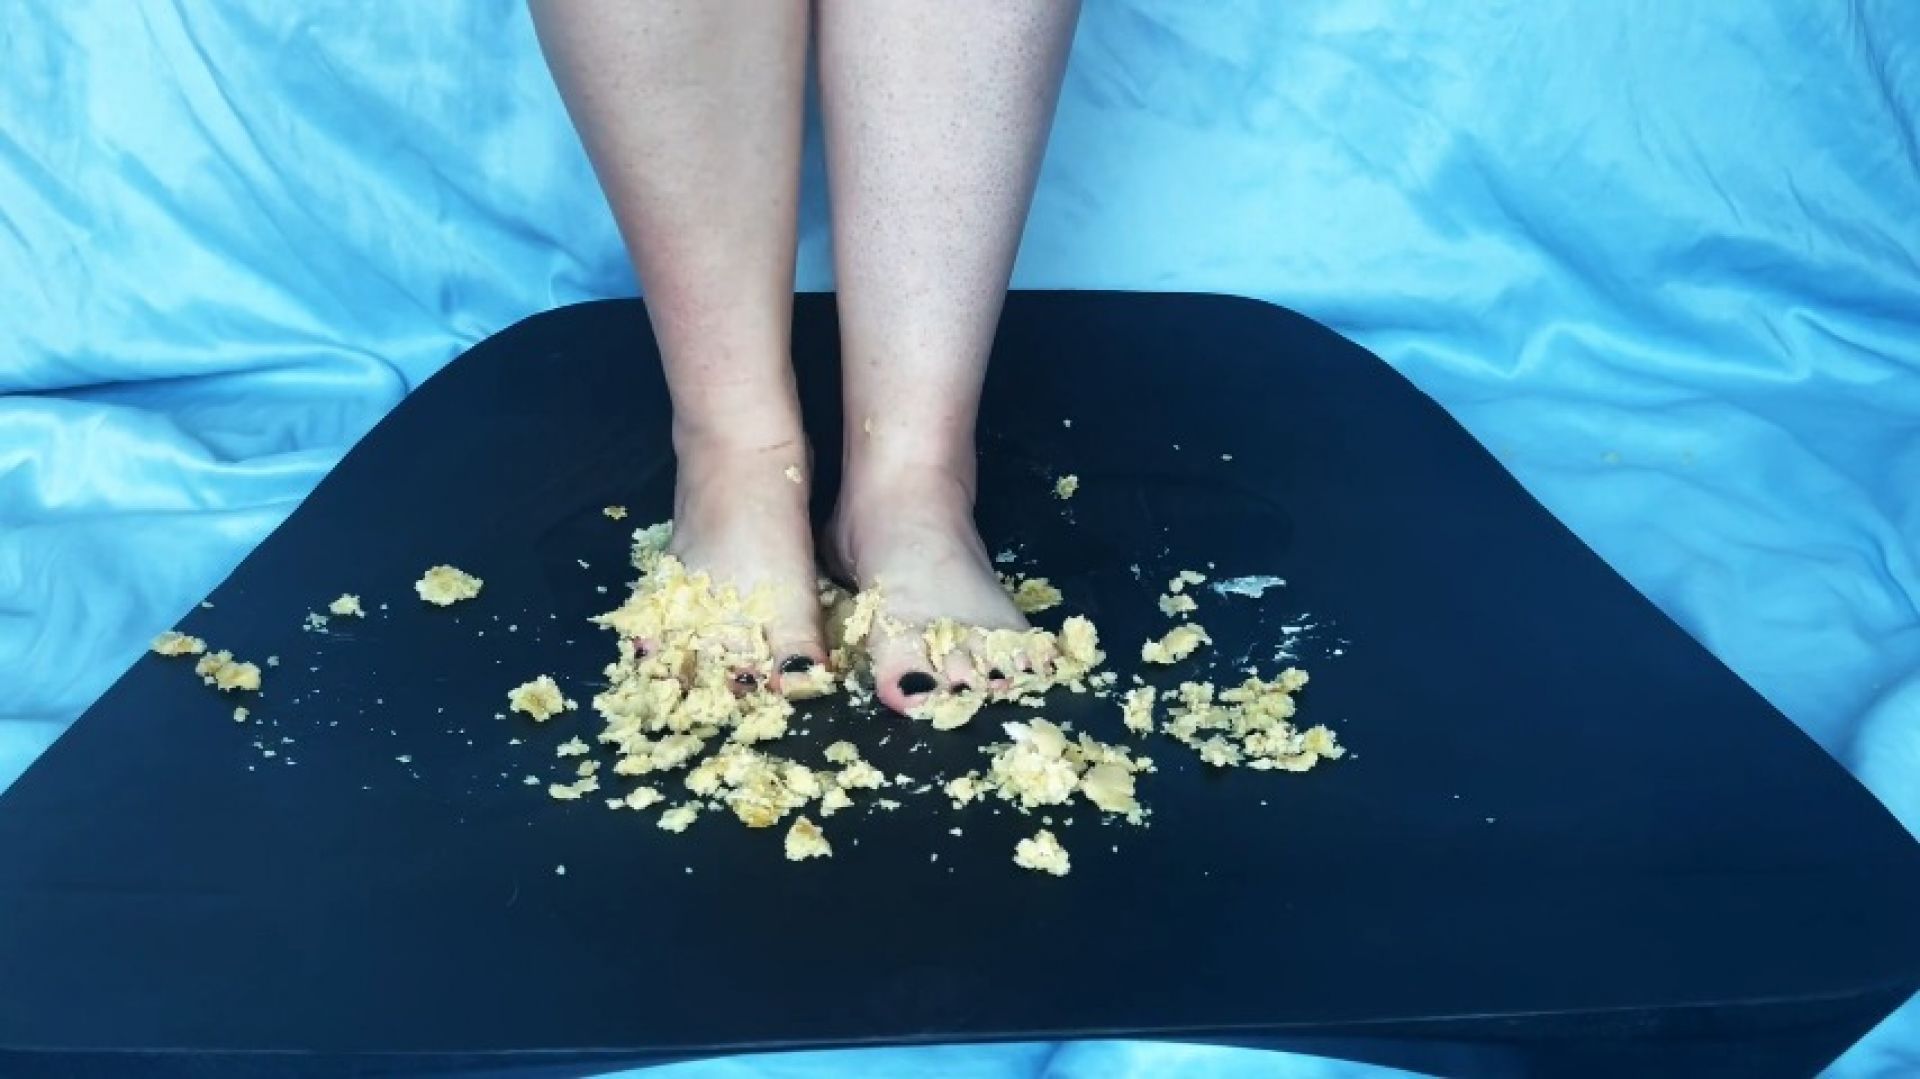 Cookie dough feet play and toe sucking